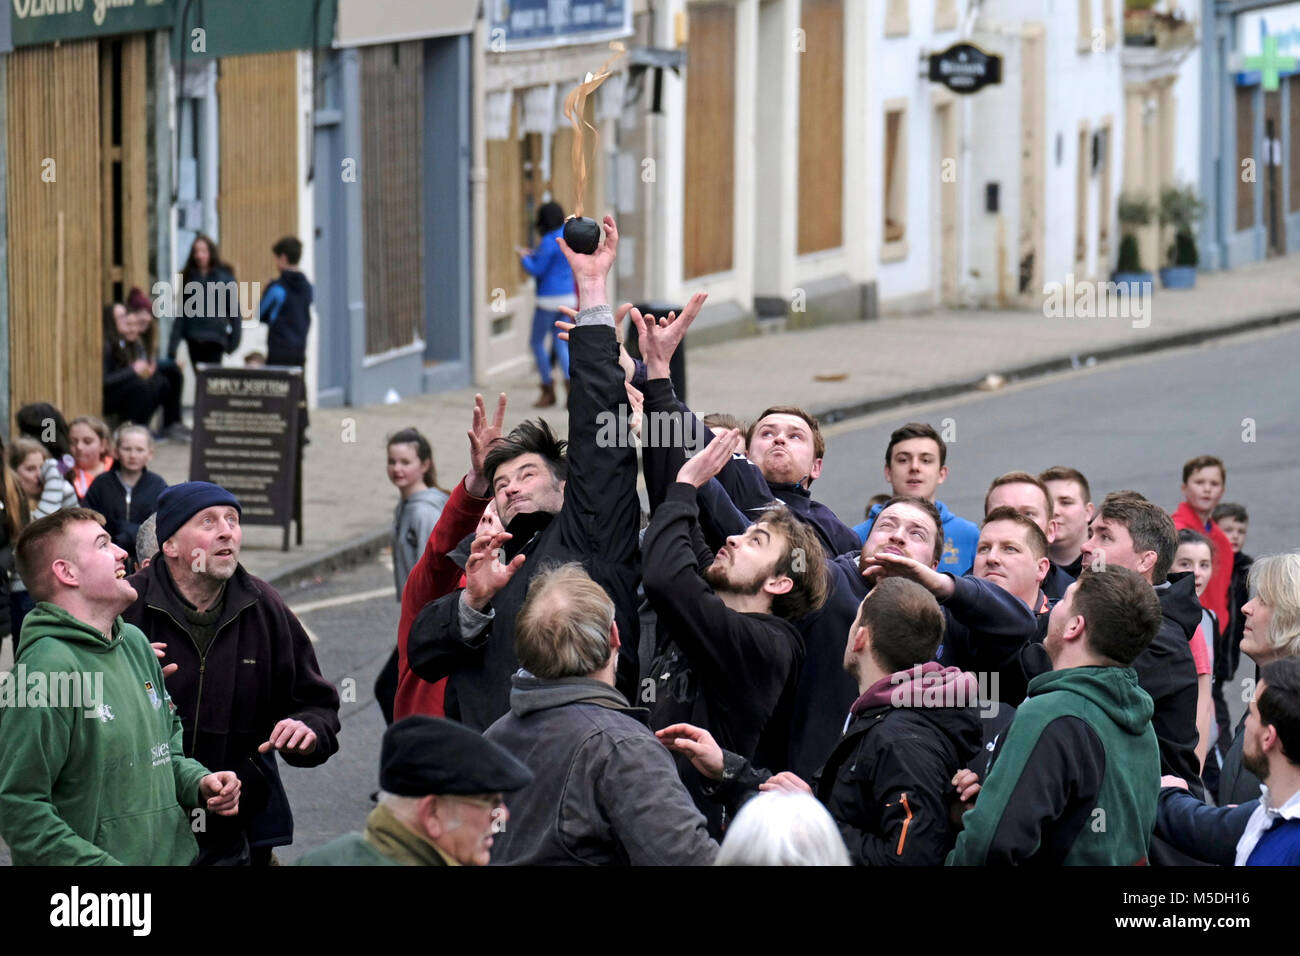 Jedburgh, Mercat Cross, UK. 22nd Feb, 2018. Jed Hand Ba' The annual game of hand ba' takes place every year the Thursday after Fastern's E'en. The tradition derives from 1548 when a party of Scots recaptured Ferniehirst Castle, a mile south of Jedburgh and used an Englishman's head in a celebratory game after the battle. ( Credit: Rob Gray/Alamy Live News Stock Photo